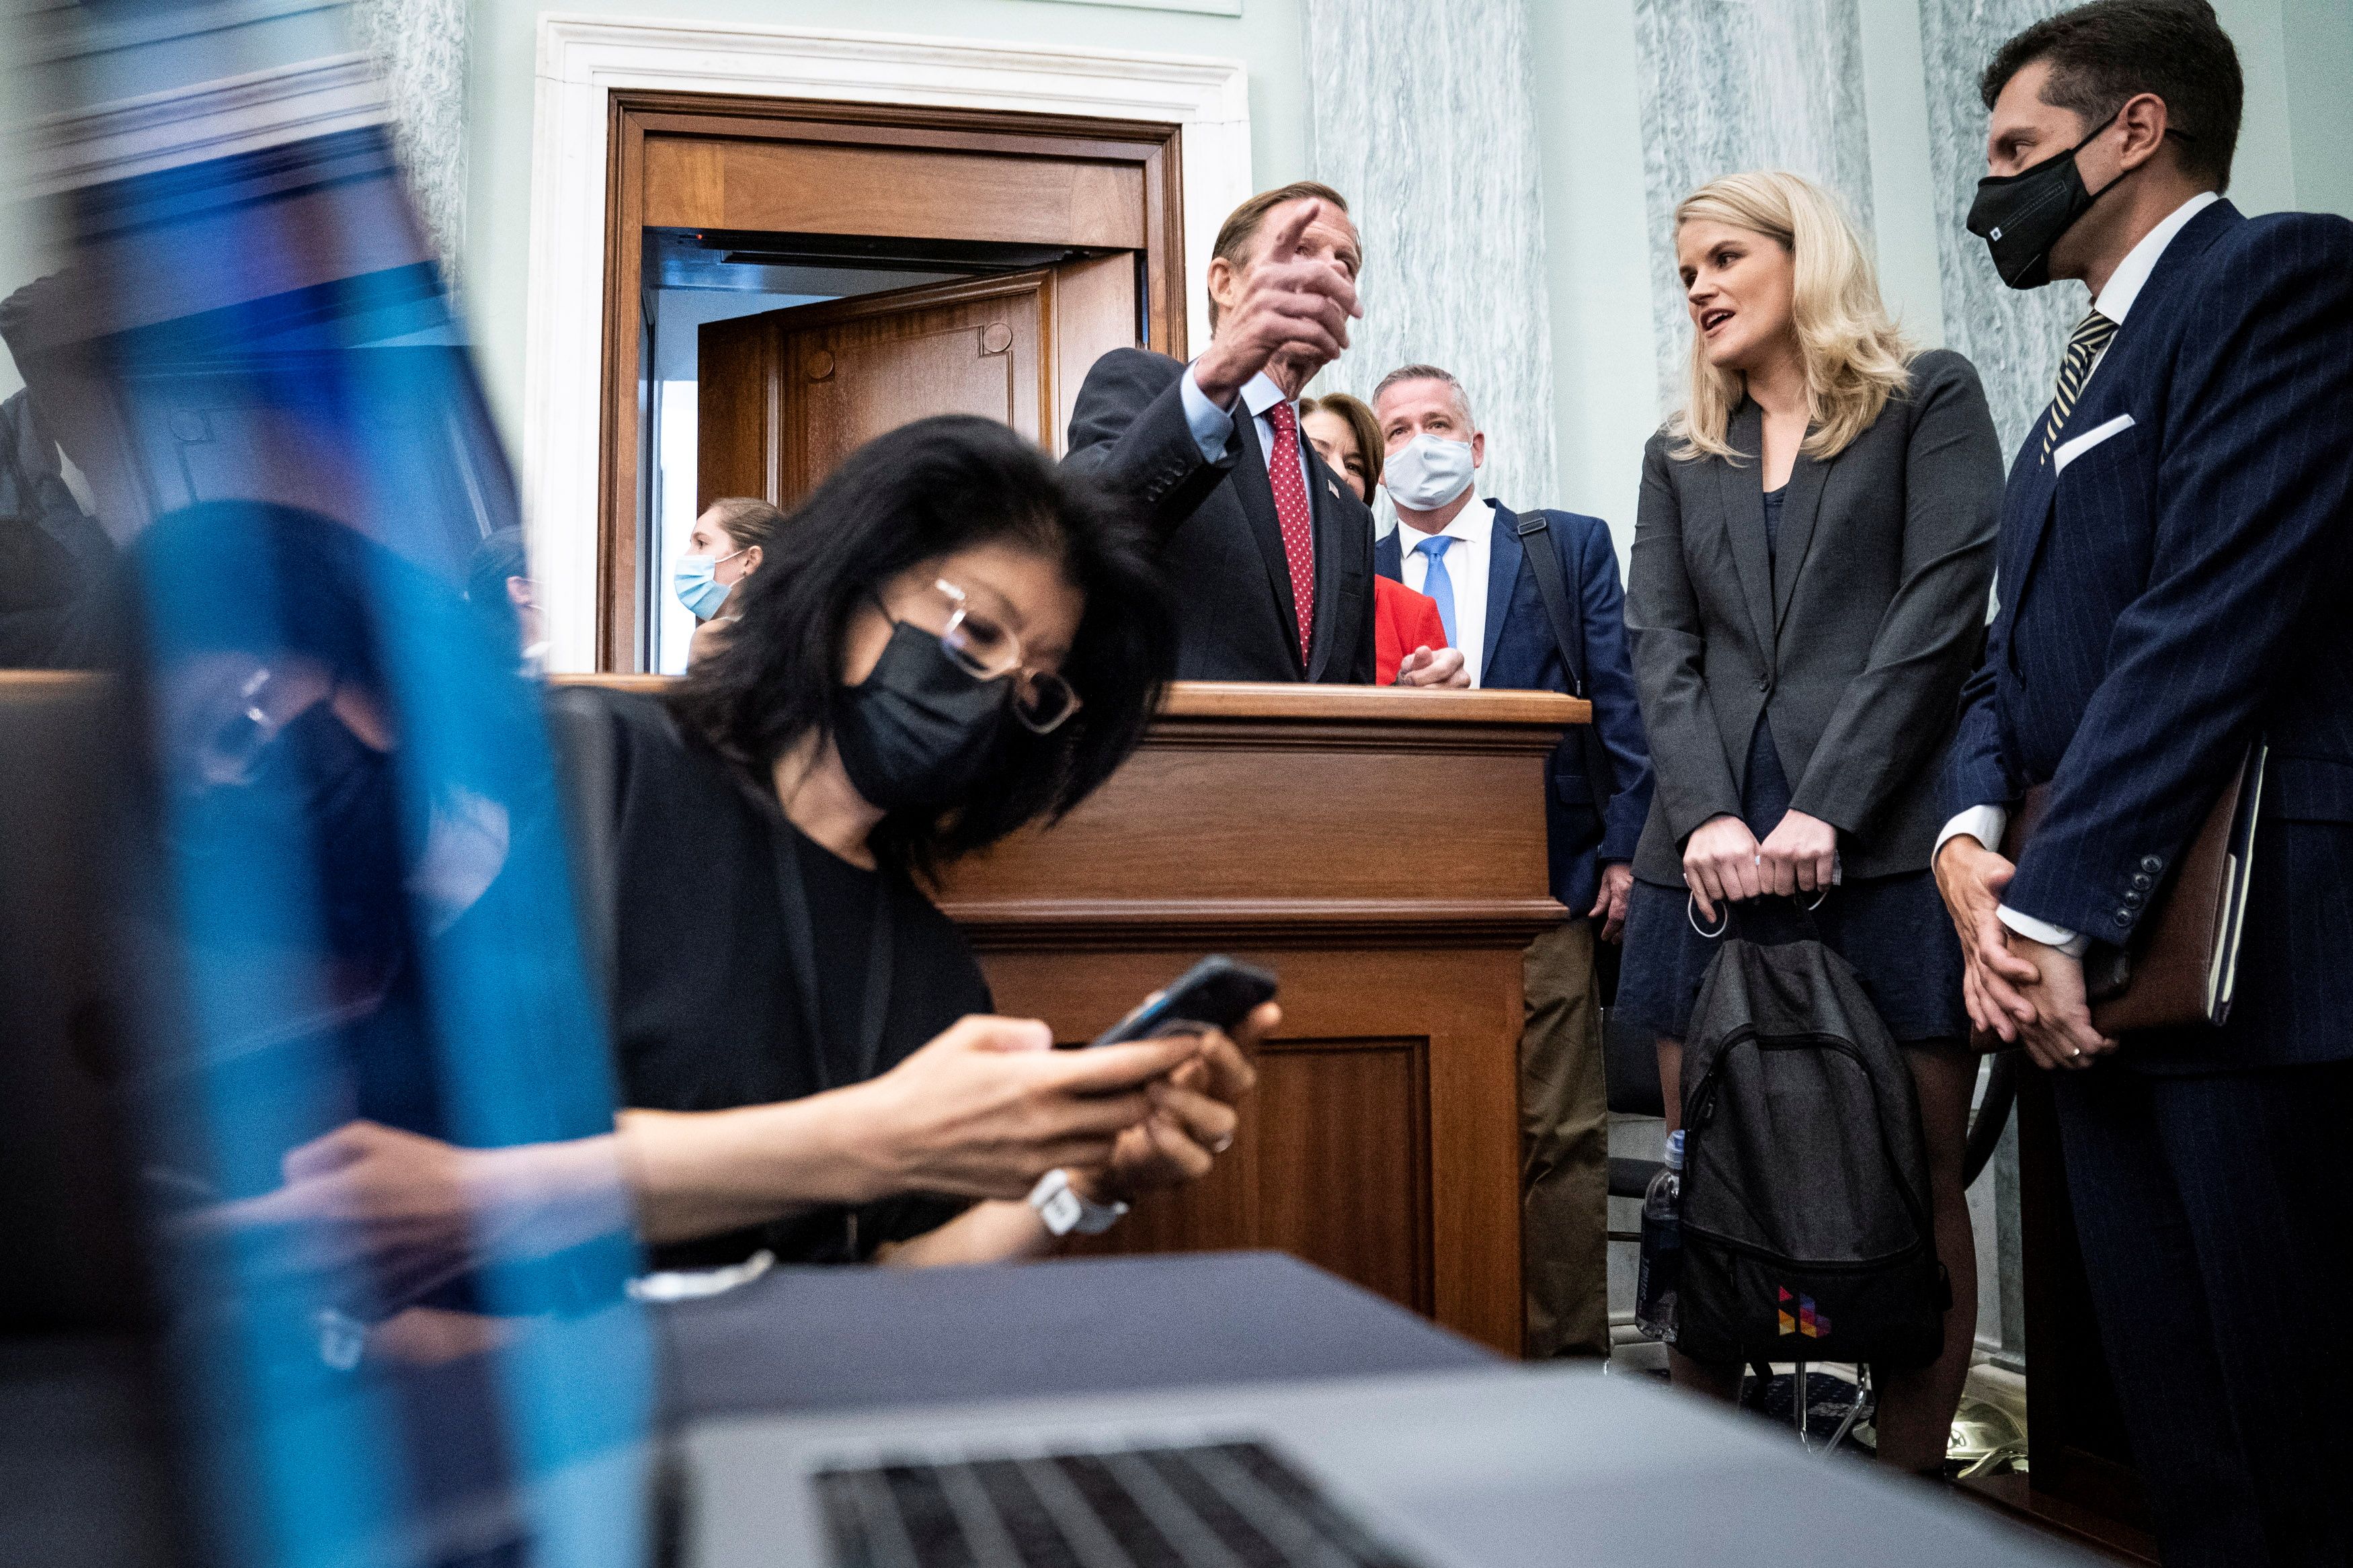 Former Facebook employee and whistleblower Frances Haugen speaks with Sen. Richard Blumenthal (D-CT) during a Senate Committee on Commerce, Science, and Transportation hearing entitled 'Protecting Kids Online: Testimony from a Facebook Whistleblower' on Capitol Hill, in Washington, U.S., October 5, 2021.  Jabin Botsford/Pool via REUTERS